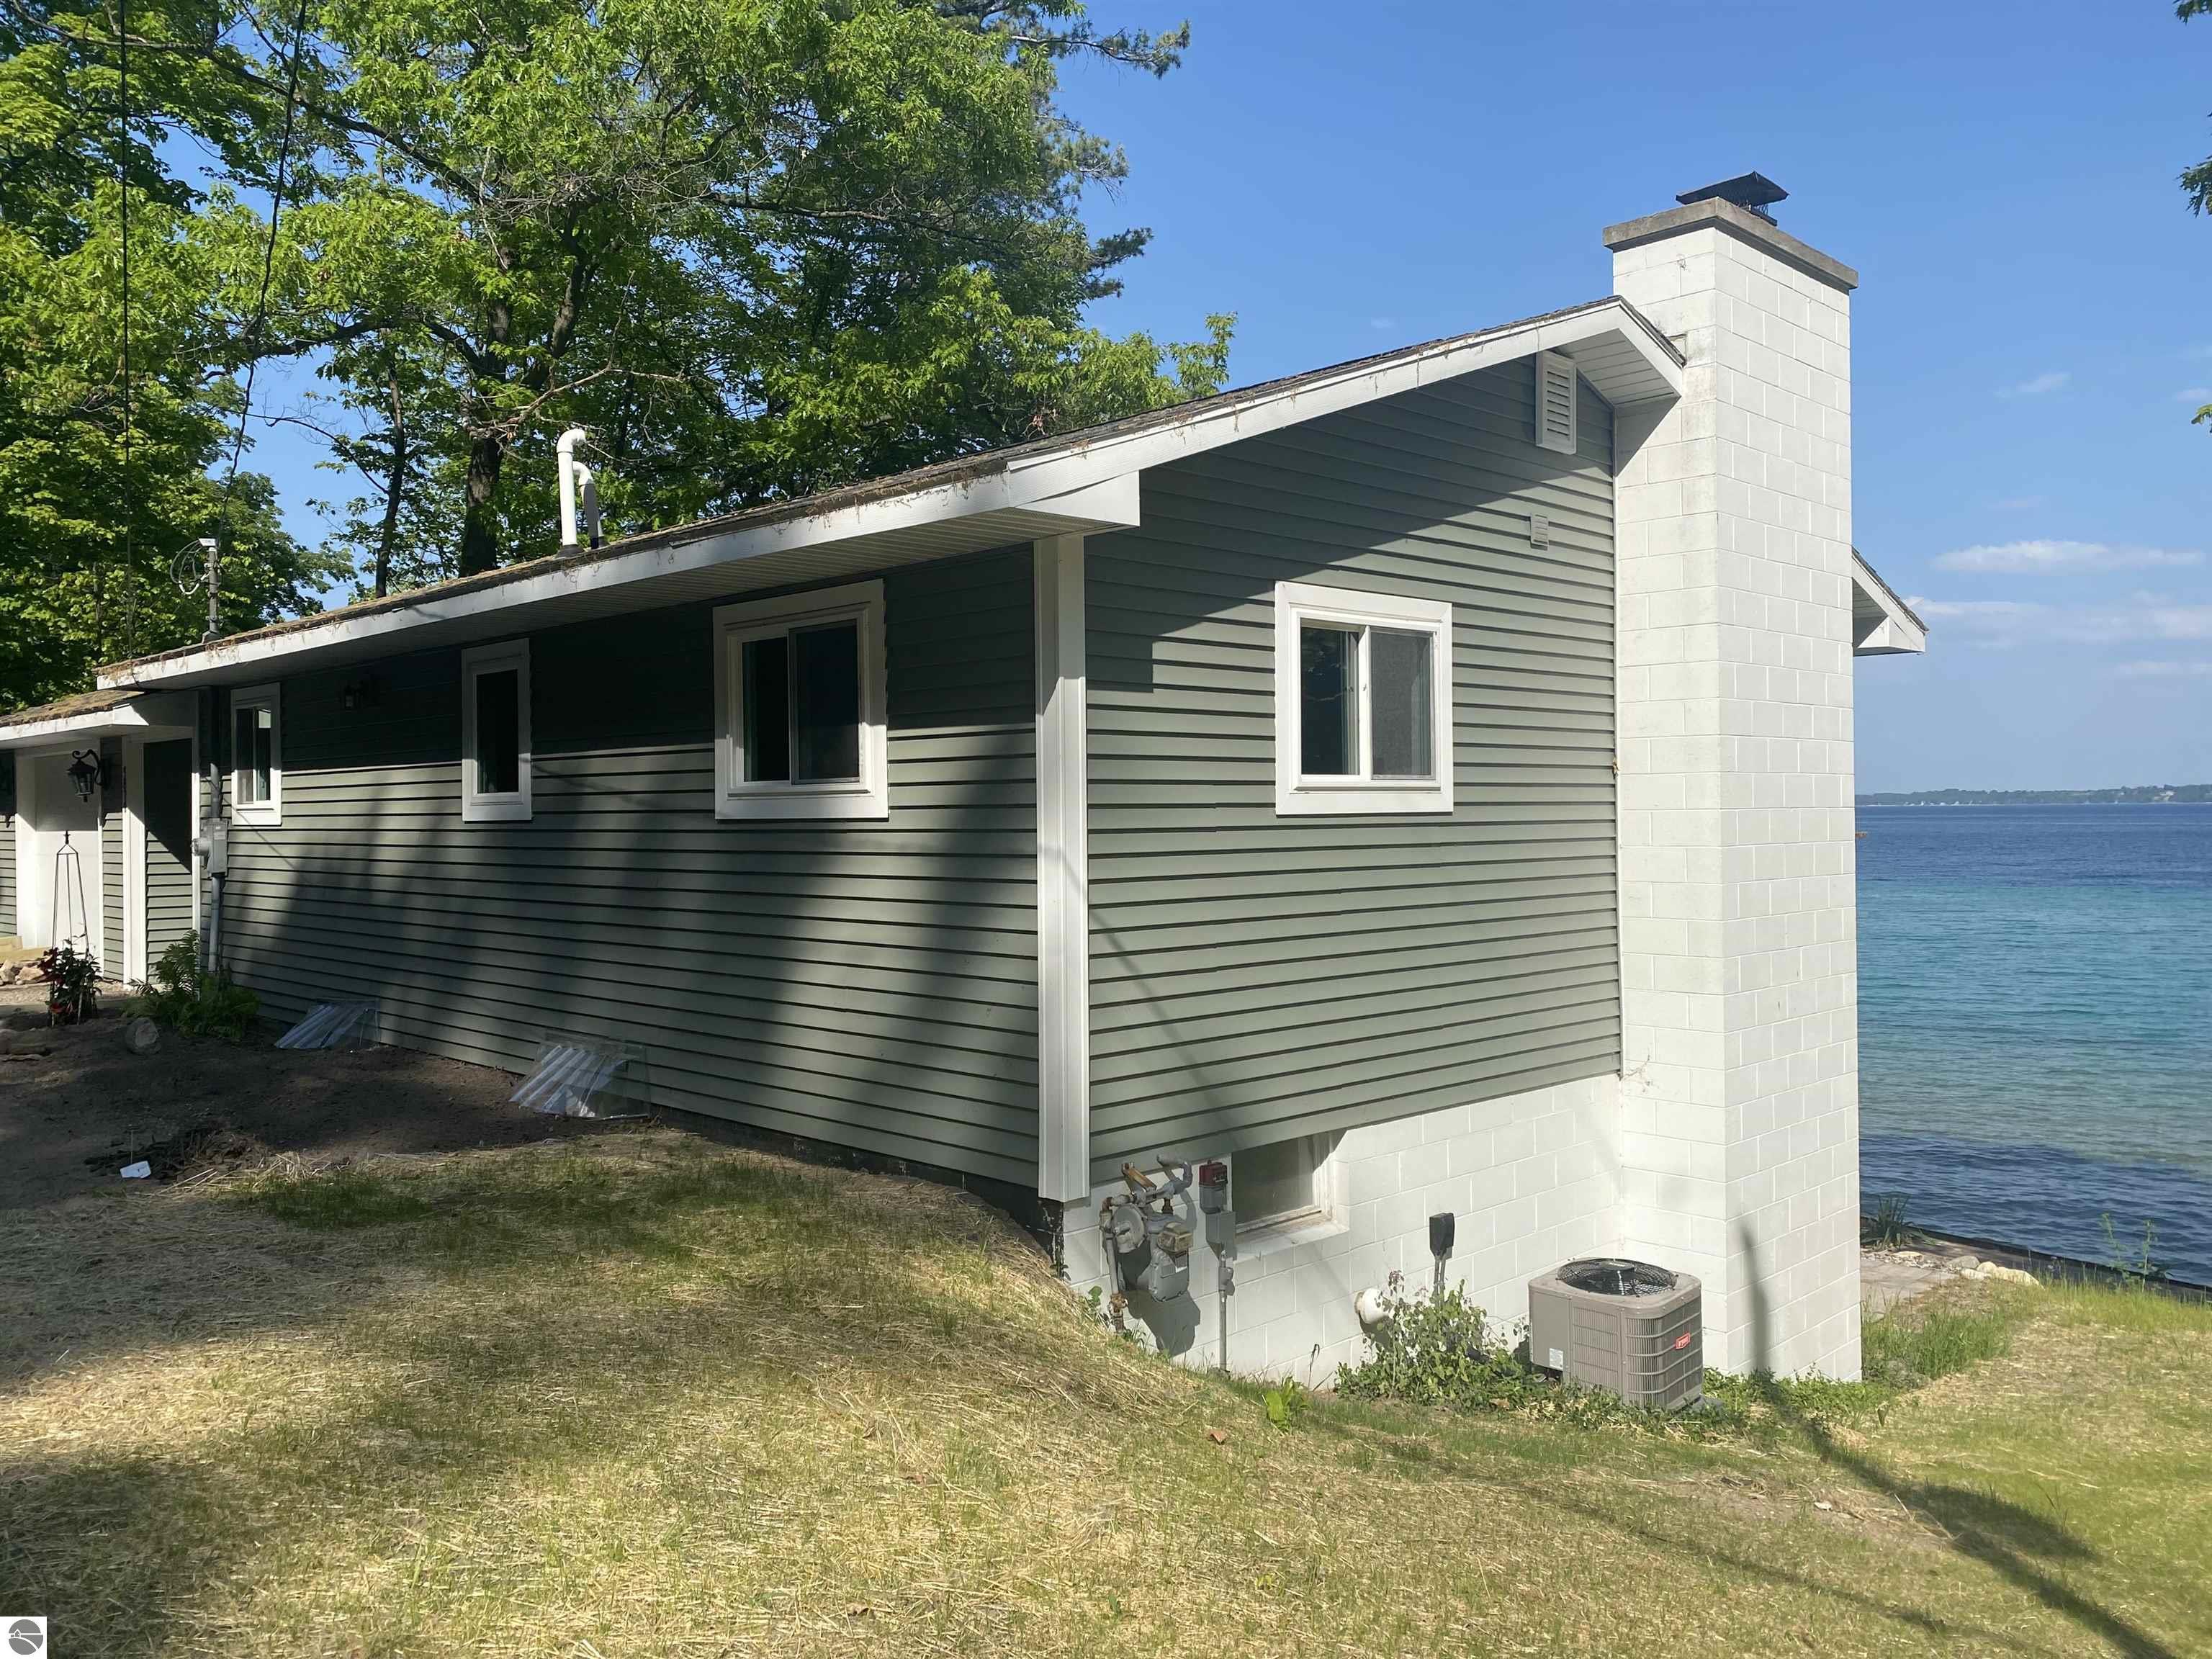 9870 Center Road, Traverse City, Michigan, 49686, United States, 2 Bedrooms Bedrooms, ,1 BathroomBathrooms,Residential,For Sale,9870 Center Road,1479554